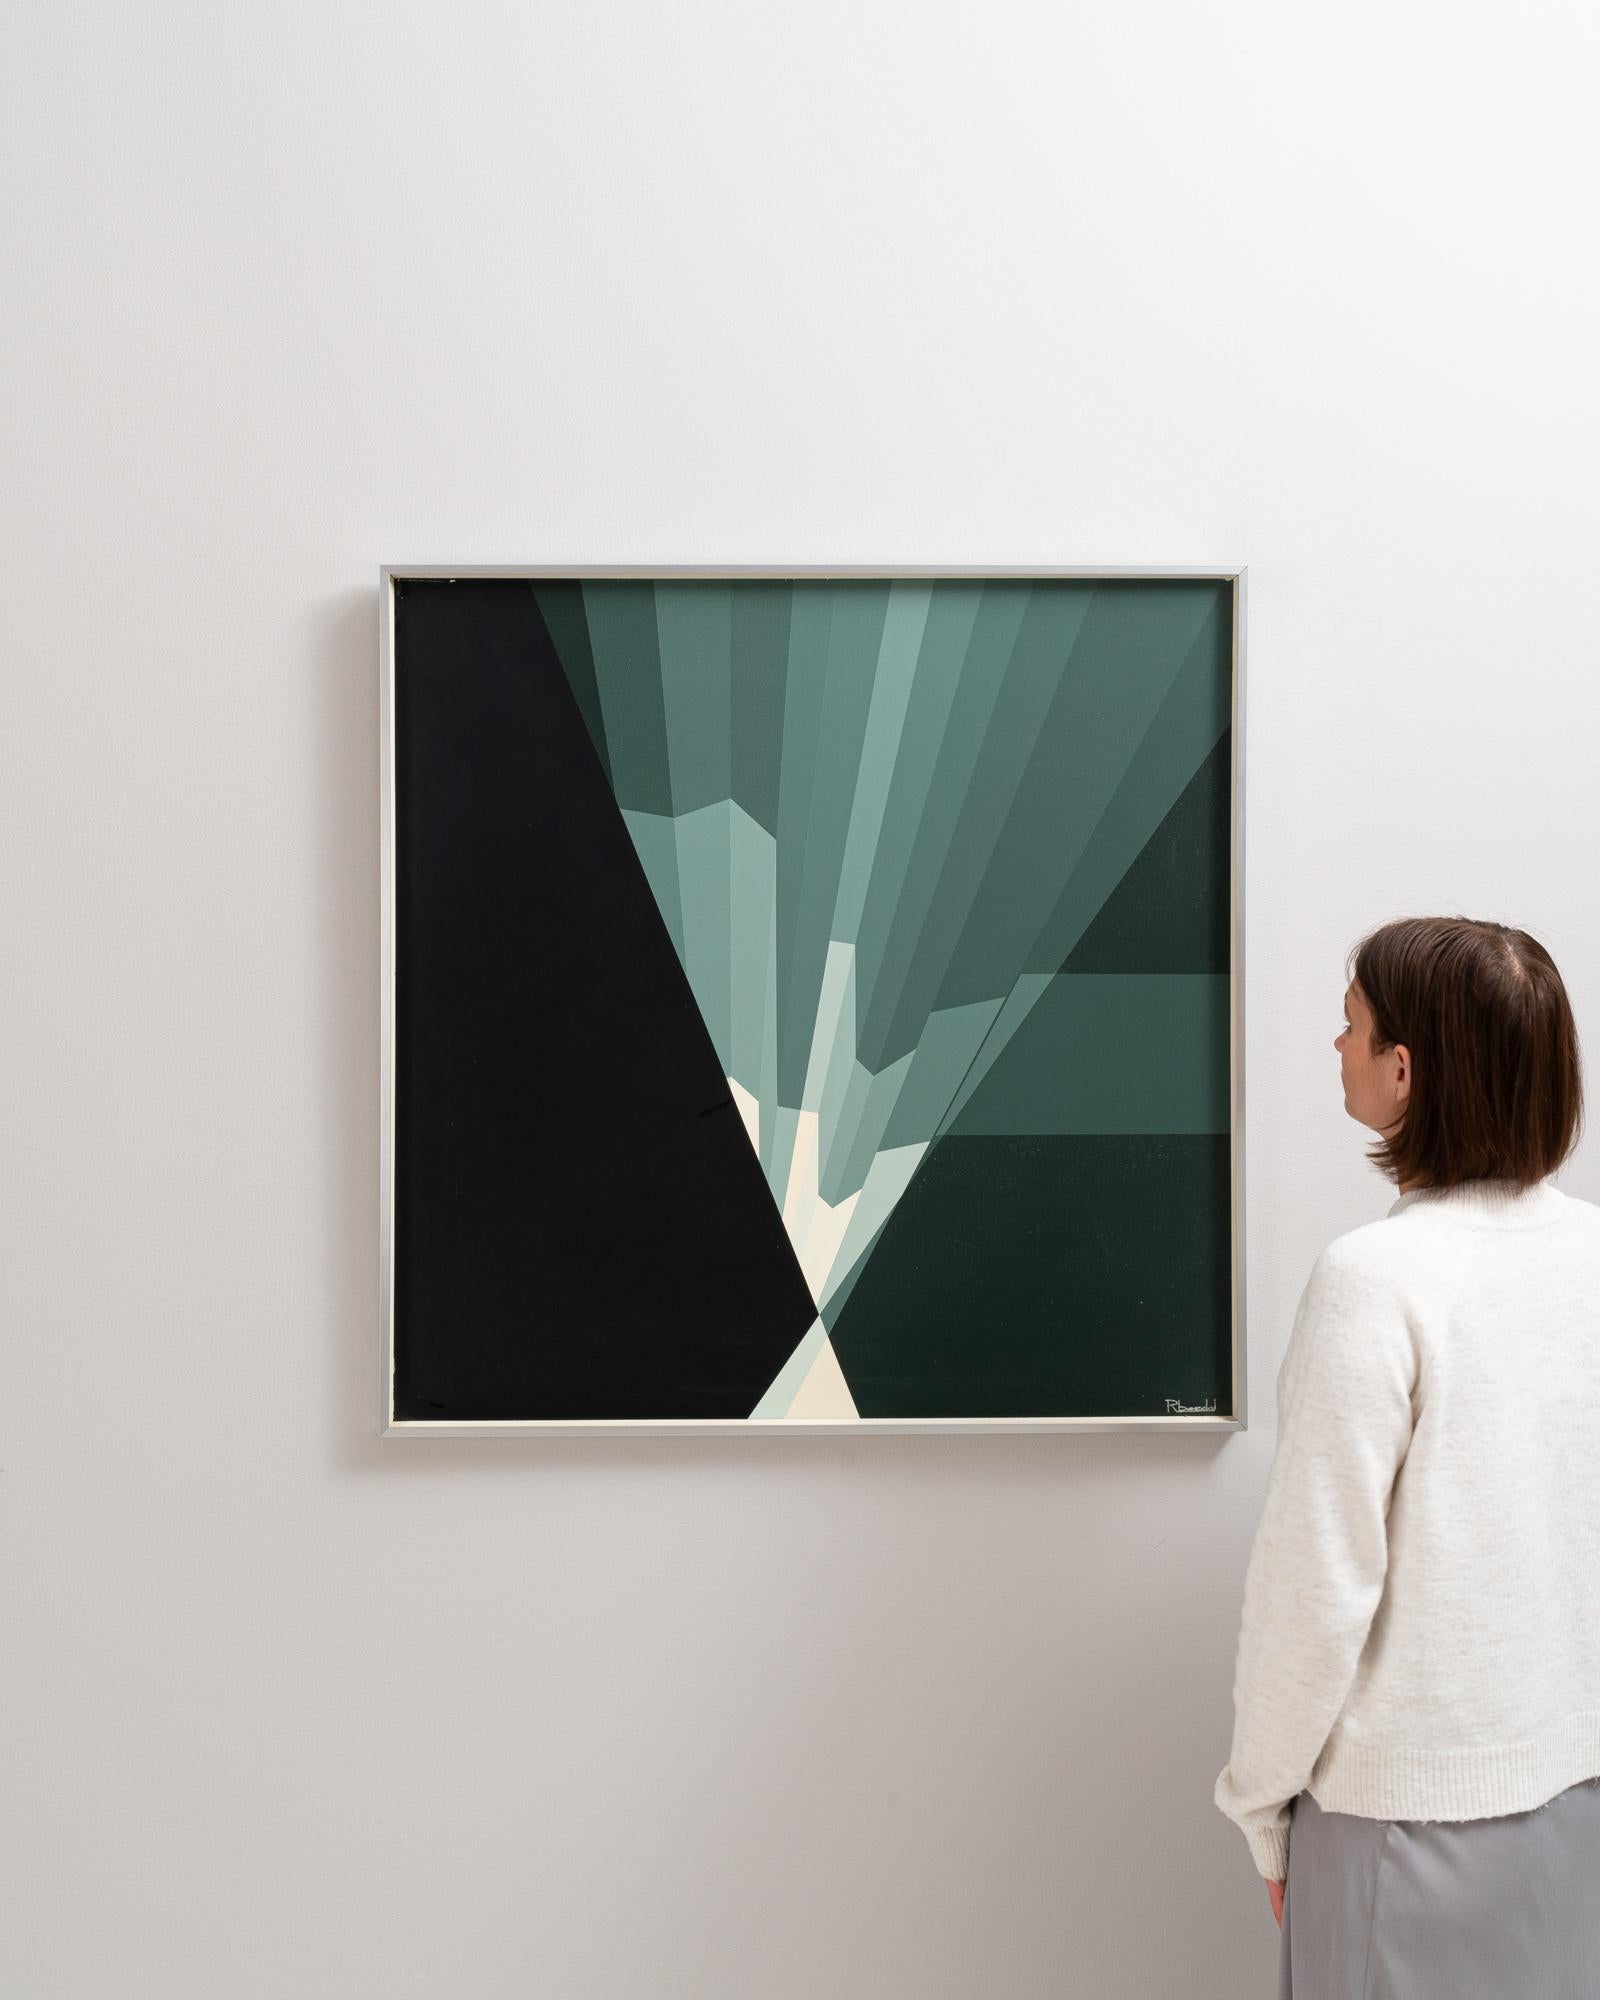 Dive into the depths of abstraction with this mesmerizing 20th Century Belgian Artwork by Rene Berdal. Enveloped in a sleek metal frame, this piece captivates with its geometric exploration, where shards of varying shades of green cut through the